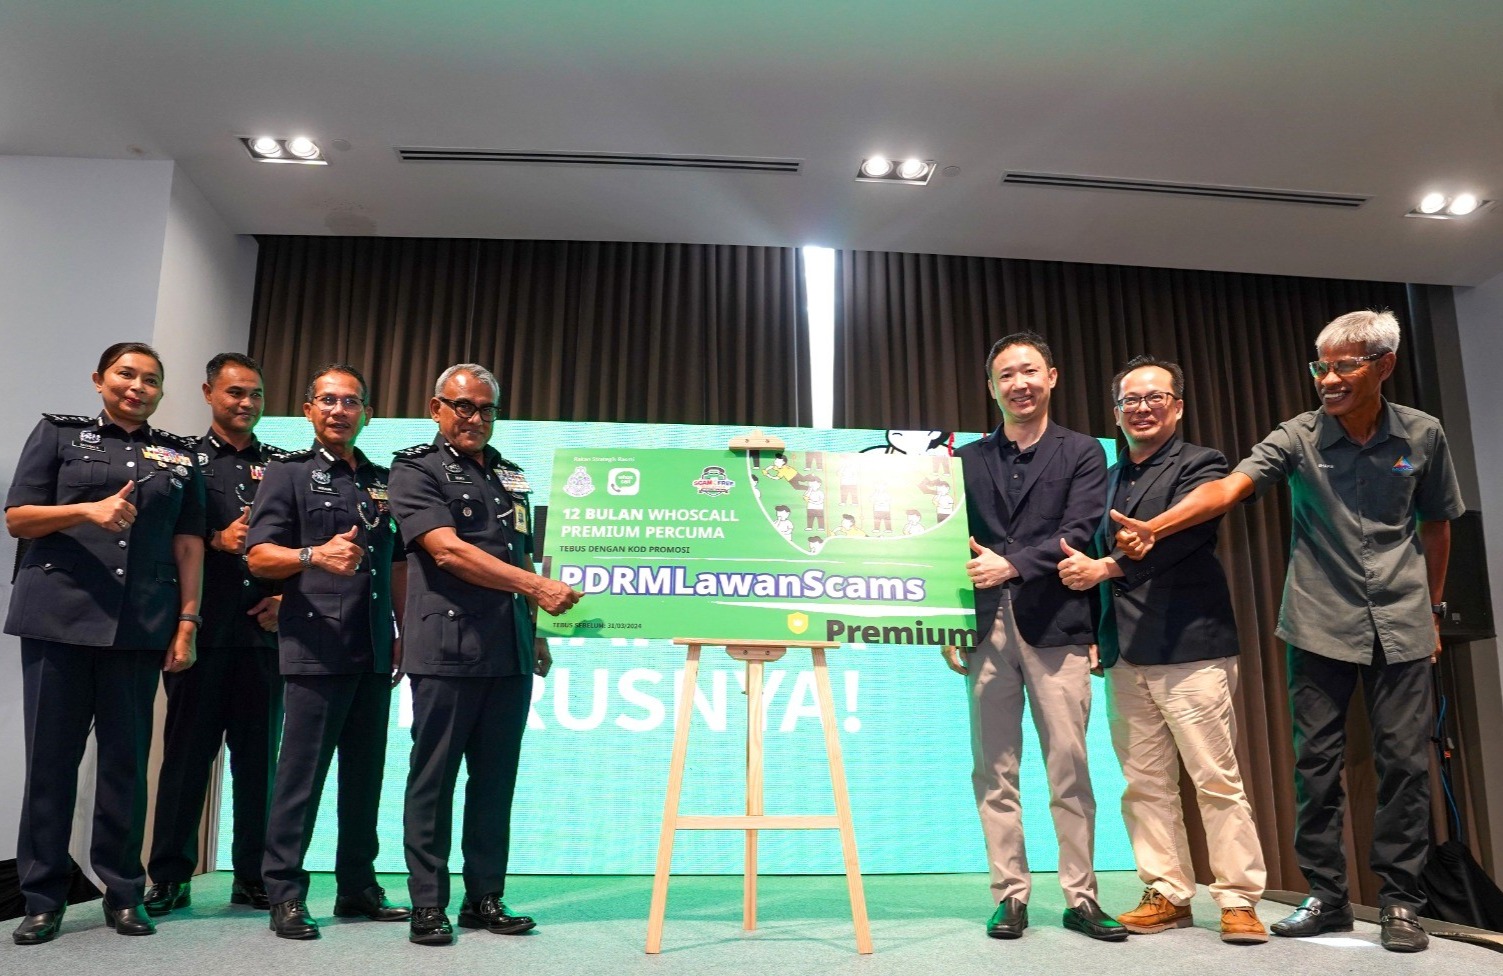 PDRM and Gogolook give away Whoscall Premium, valued at over RM87 Million, to help safeguard Malaysians against scams.